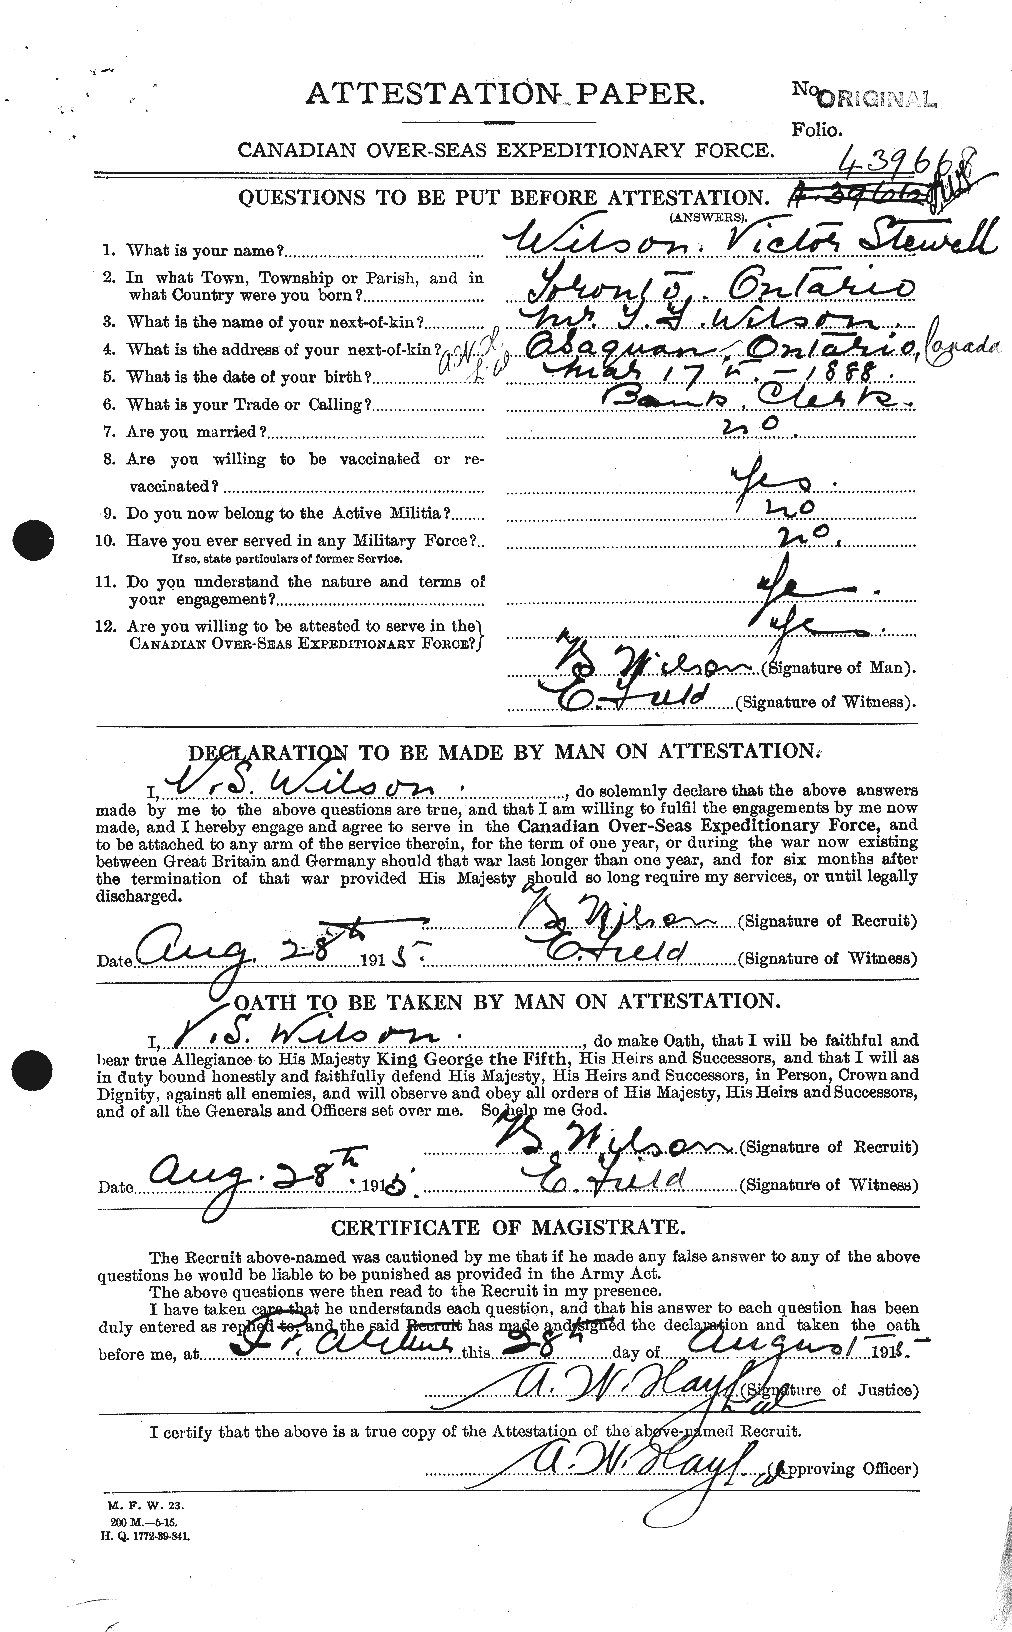 Personnel Records of the First World War - CEF 681714a